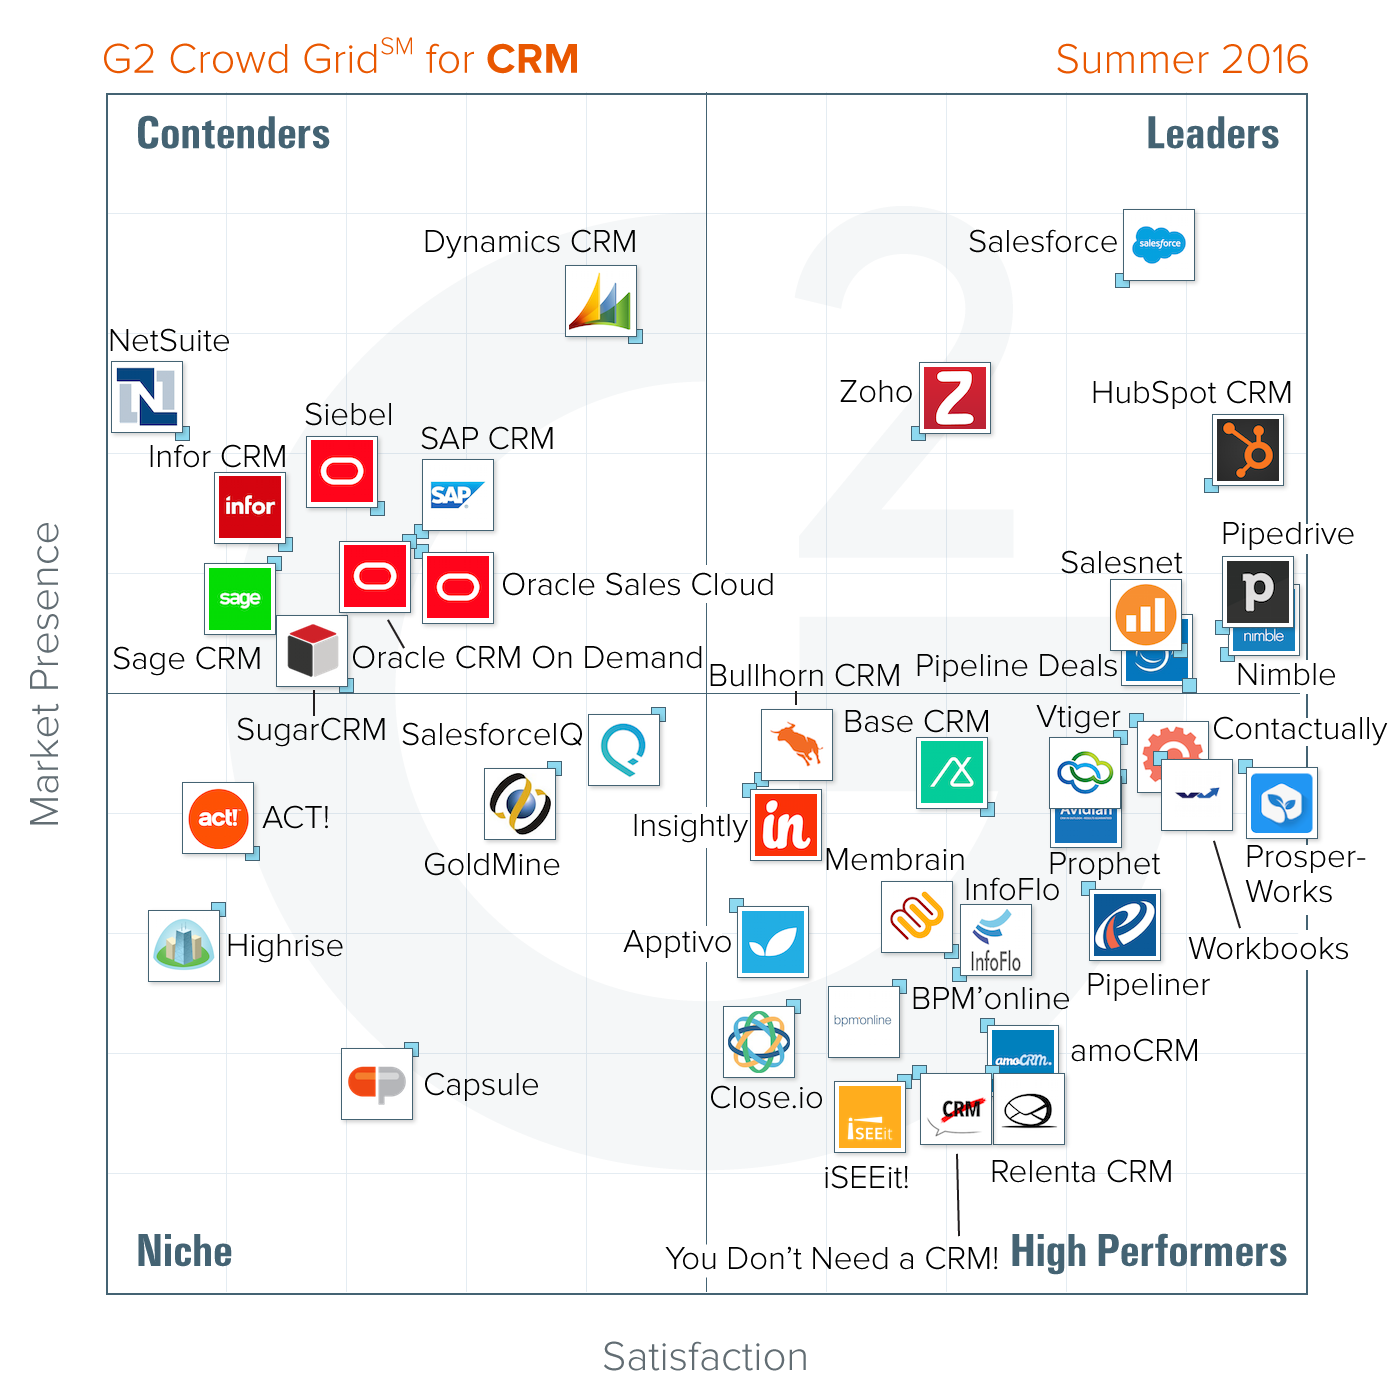 The Best CRM Software According to G2 Crowd Summer 2016 Rankings, Based